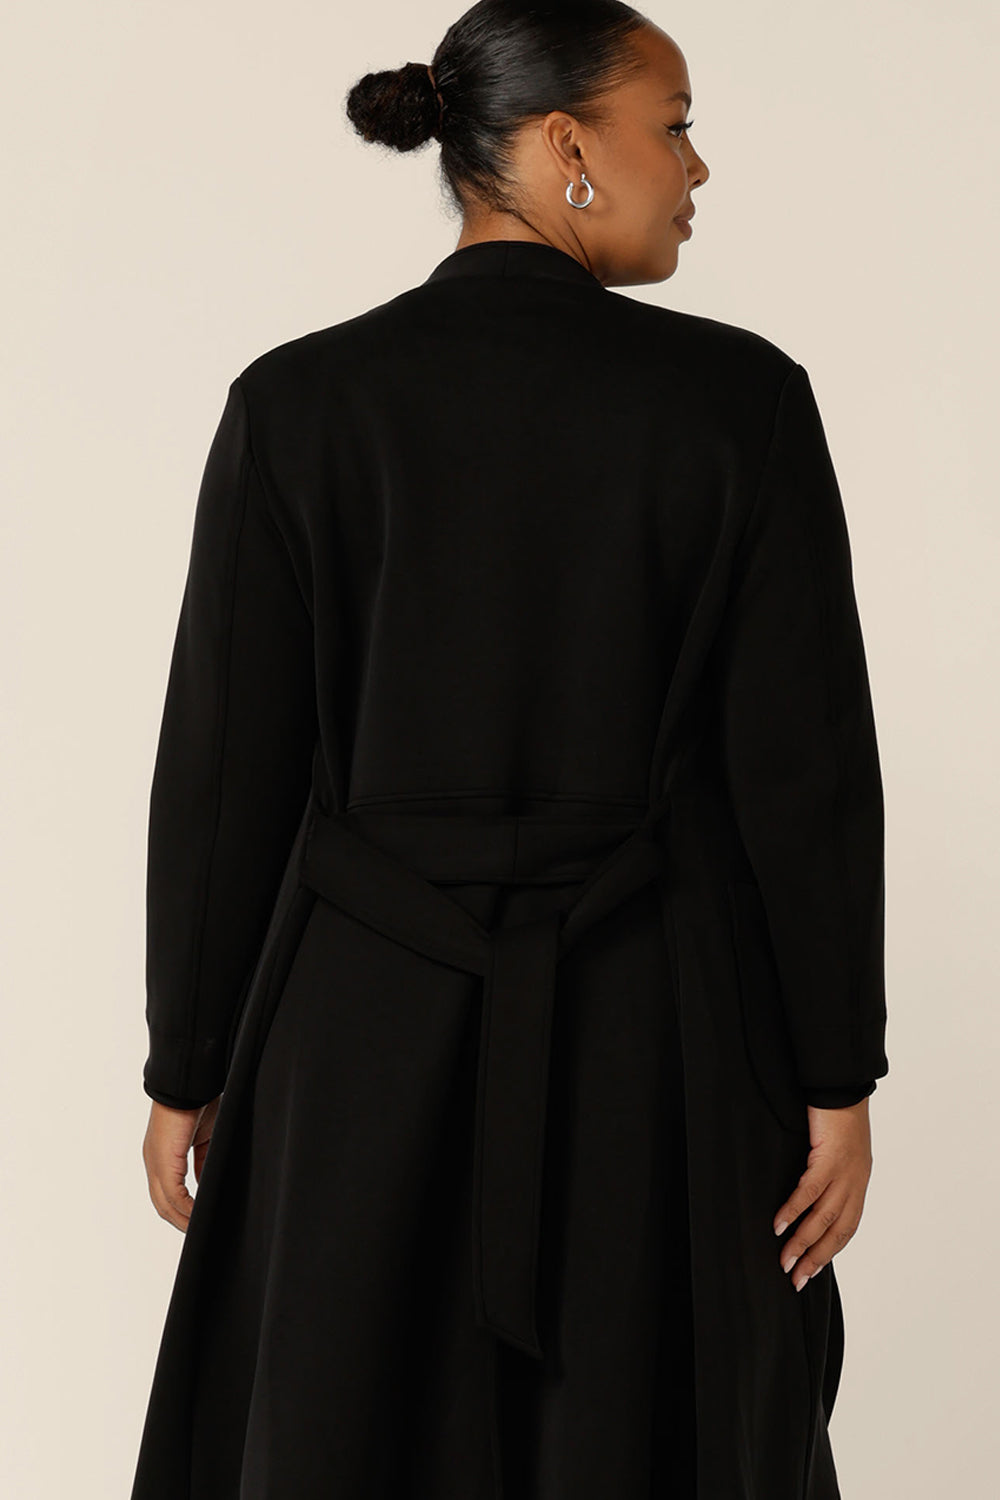 Back view of a softly tailored black trenchcoat in modal fabric, made in Australia by Australian and New Zealand women's clothing brand, L&F.